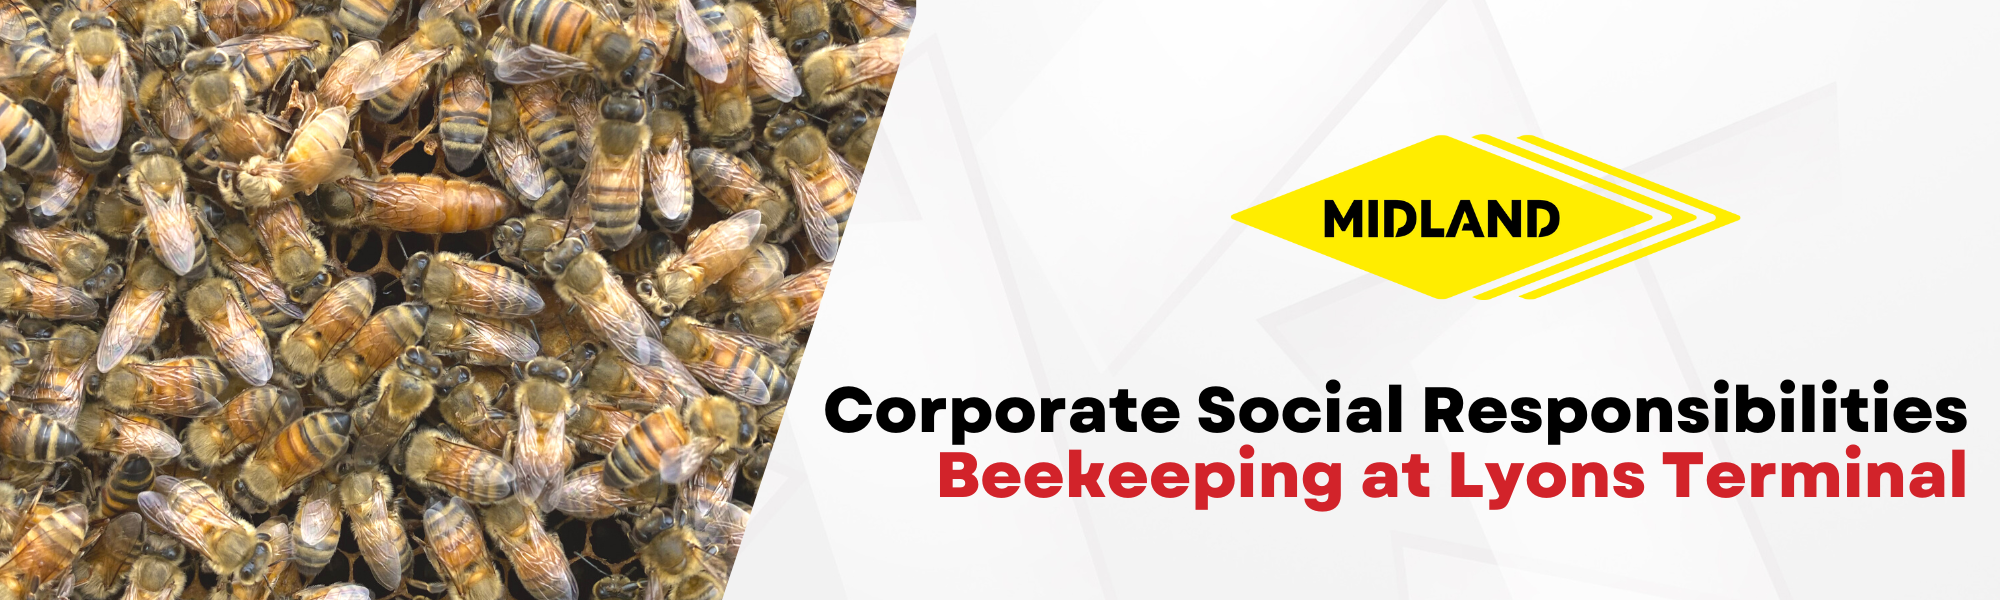 I. Introduction to Beekeeping and Social Responsibility